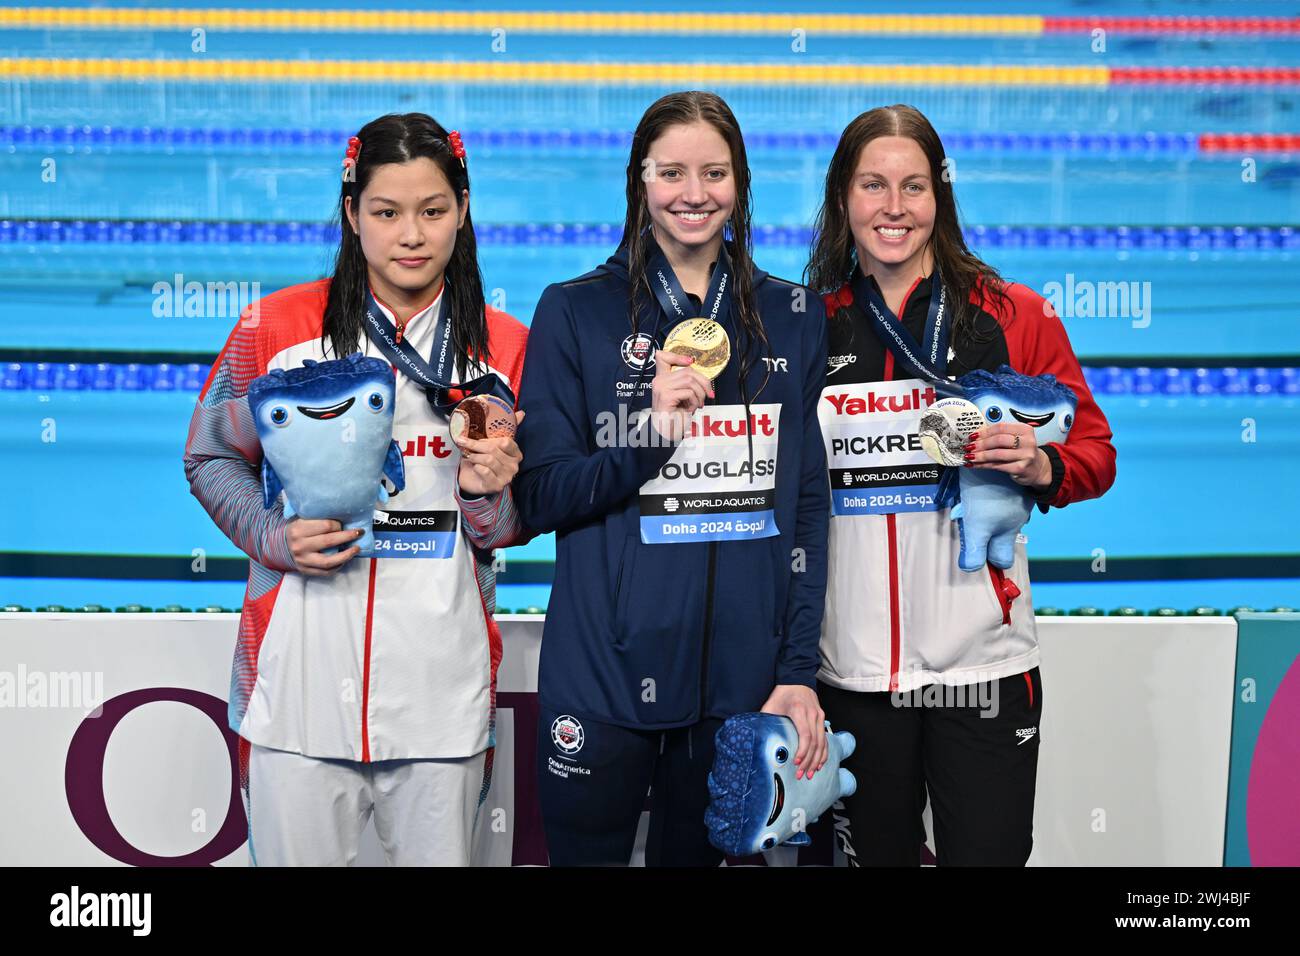 Doha, Qatar. 12th Feb, 2024. Gold medalist Kate Douglass(C) of the United States, silver medalist Sydney Pickrem (R) of Canada, bronze medalist Yu Yiting of China pose for photos after the awarding ceremony of the women's 200m individual medley final of swimming event at the World Aquatics Championships 2024 in Doha, Qatar, Feb. 12, 2024. Credit: Xue Yuge/Xinhua/Alamy Live News Stock Photo